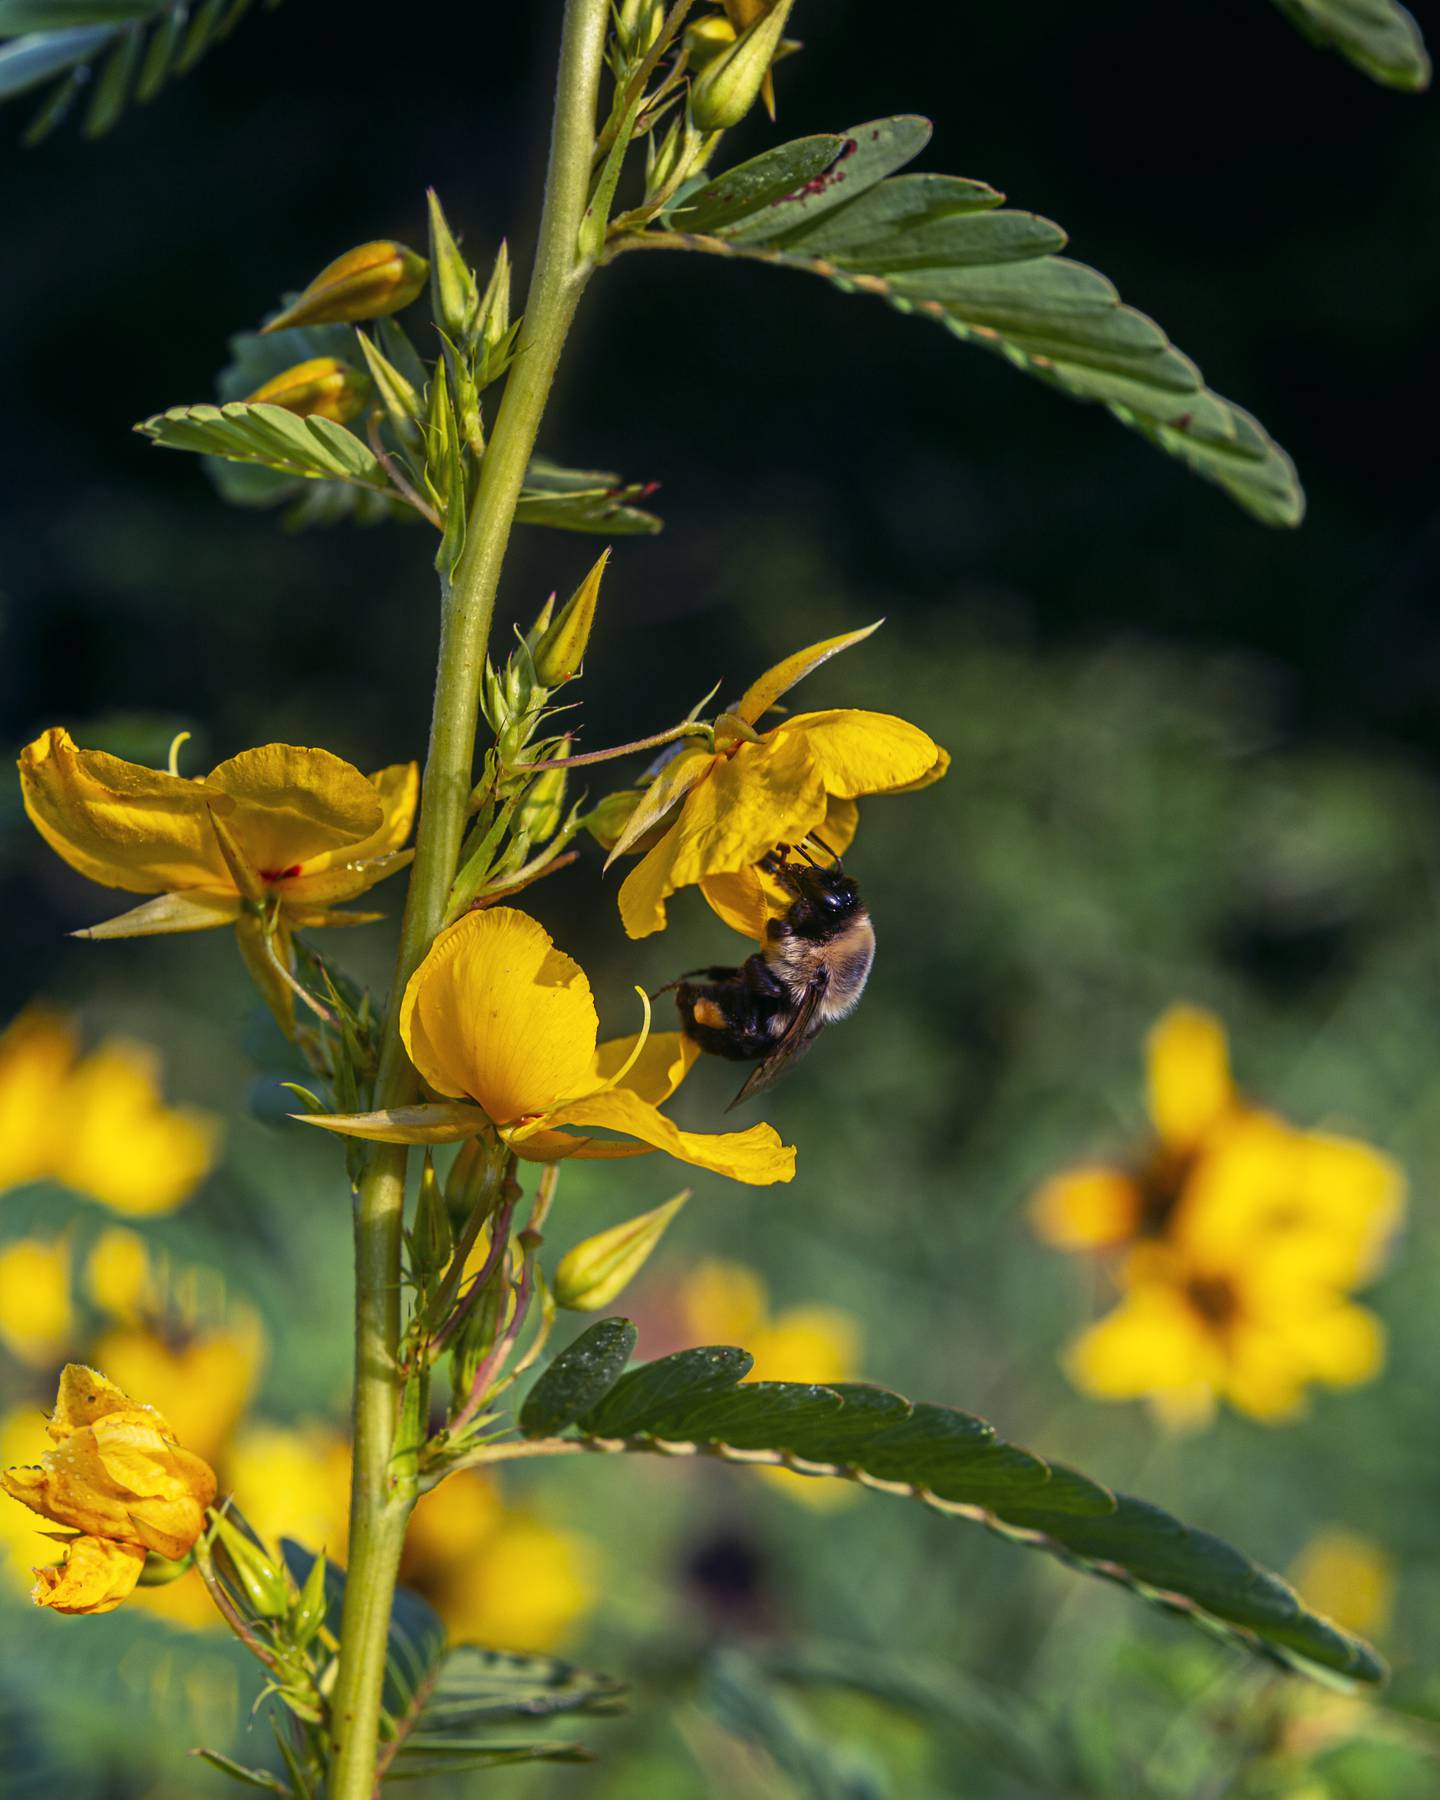 A bumble bee on a partridge pea in a pollinator field at the Emory Farm on August 3rd, 2022 in Queenstown Maryland